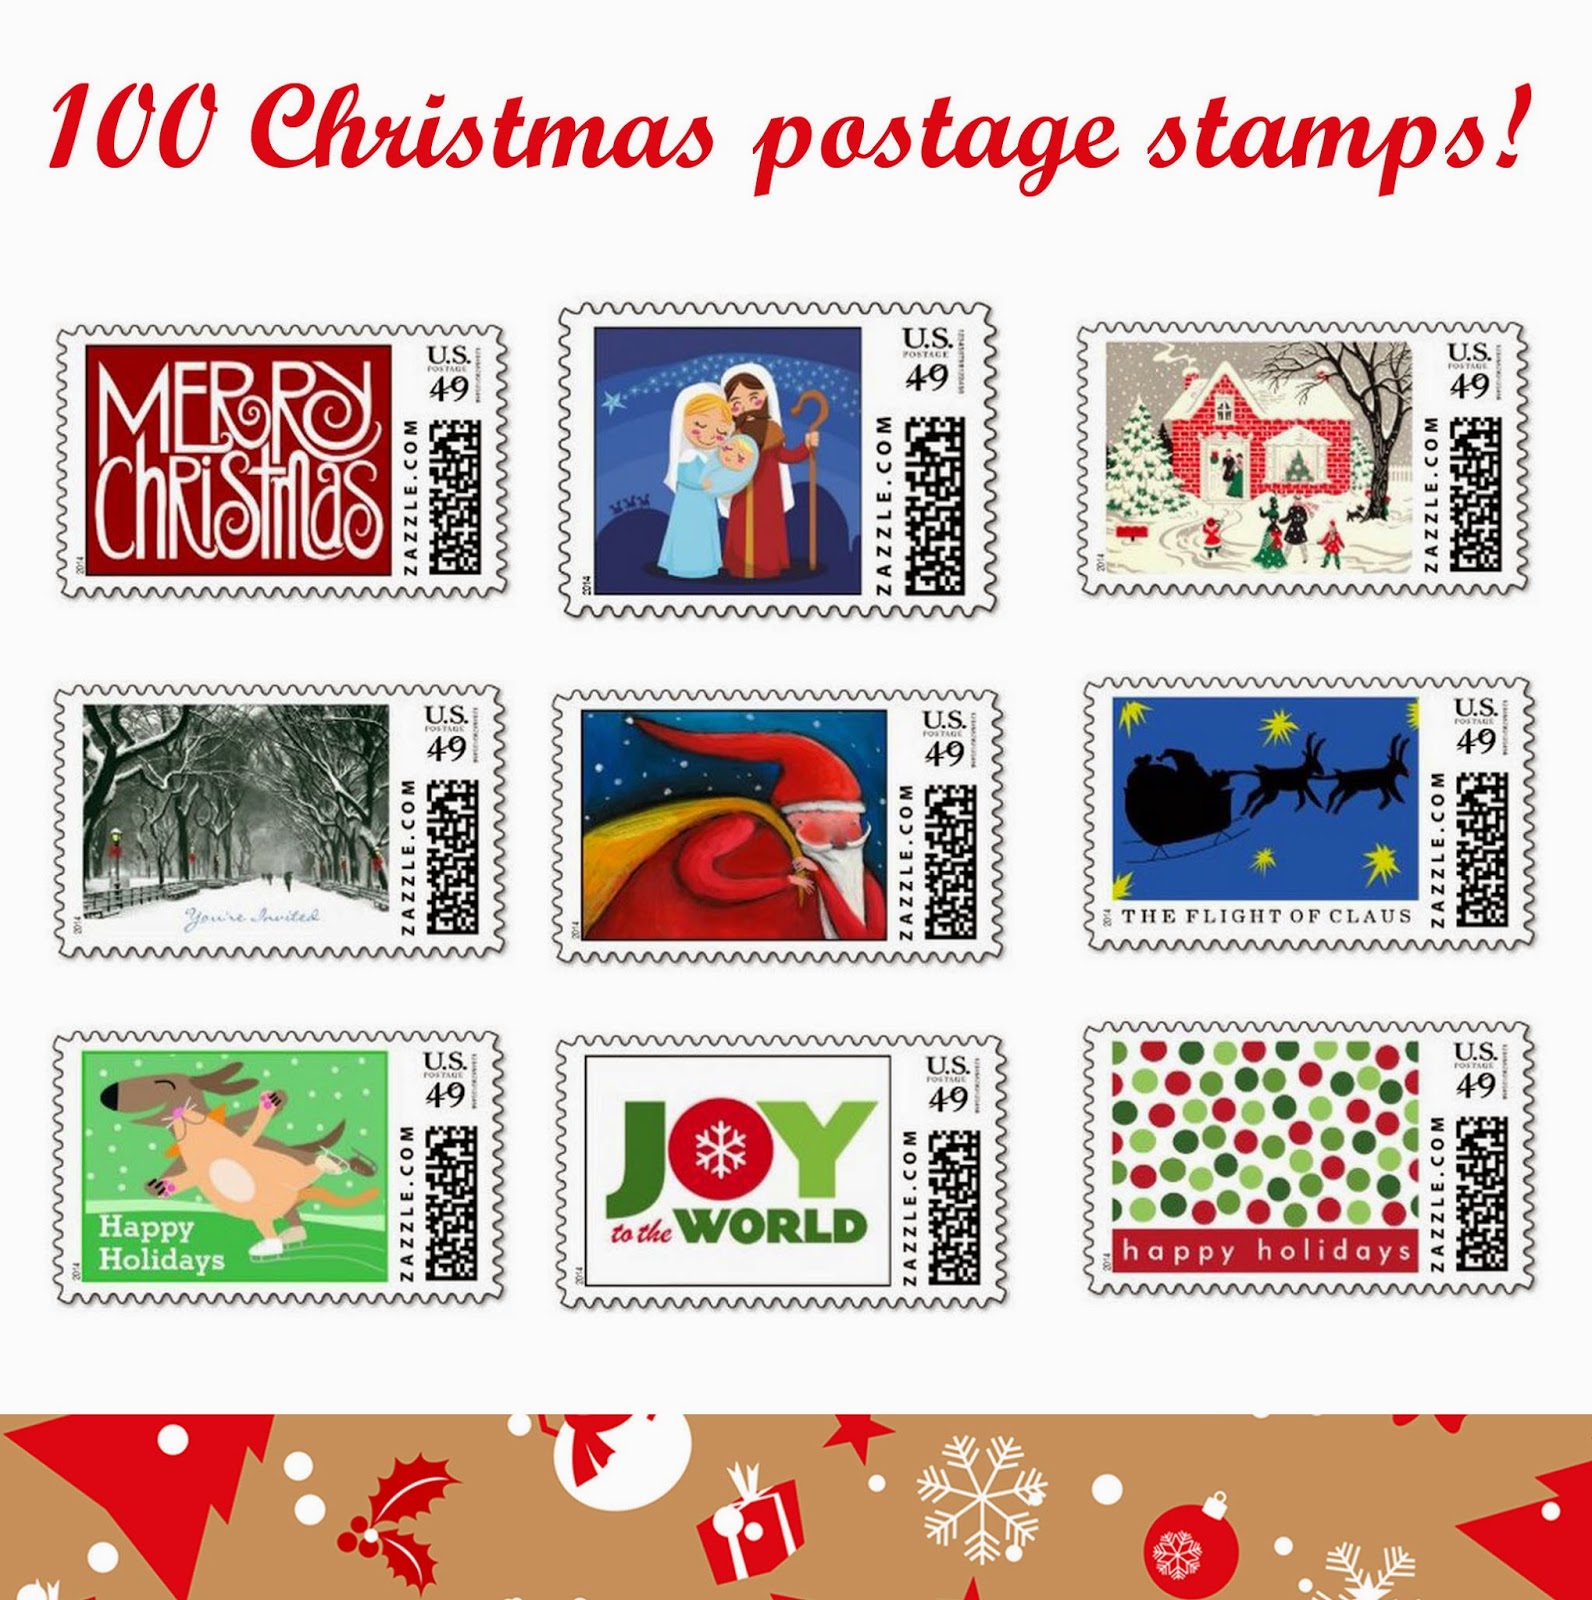 100 beautiful Christmas postage stamps you can buy online